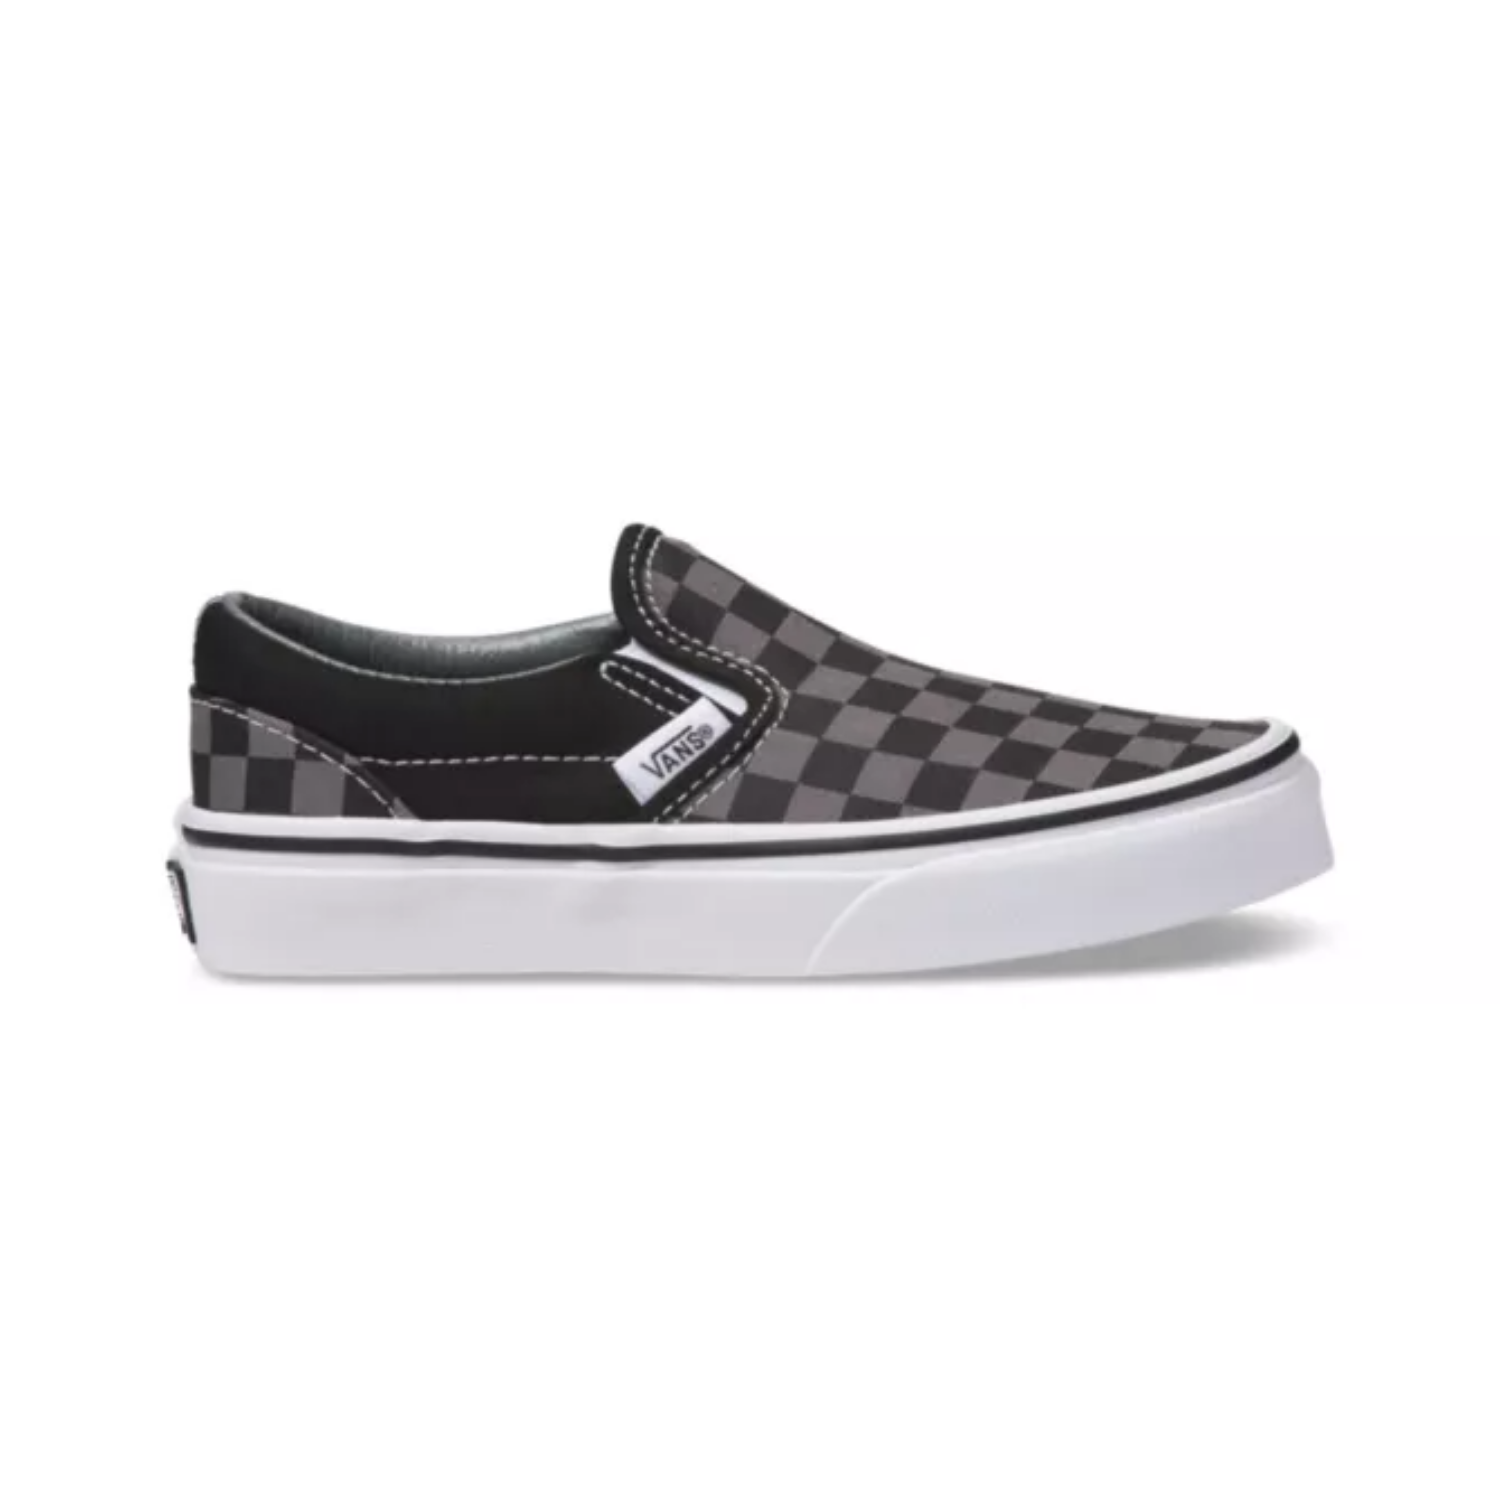 Vans Youth Shoes For Sale